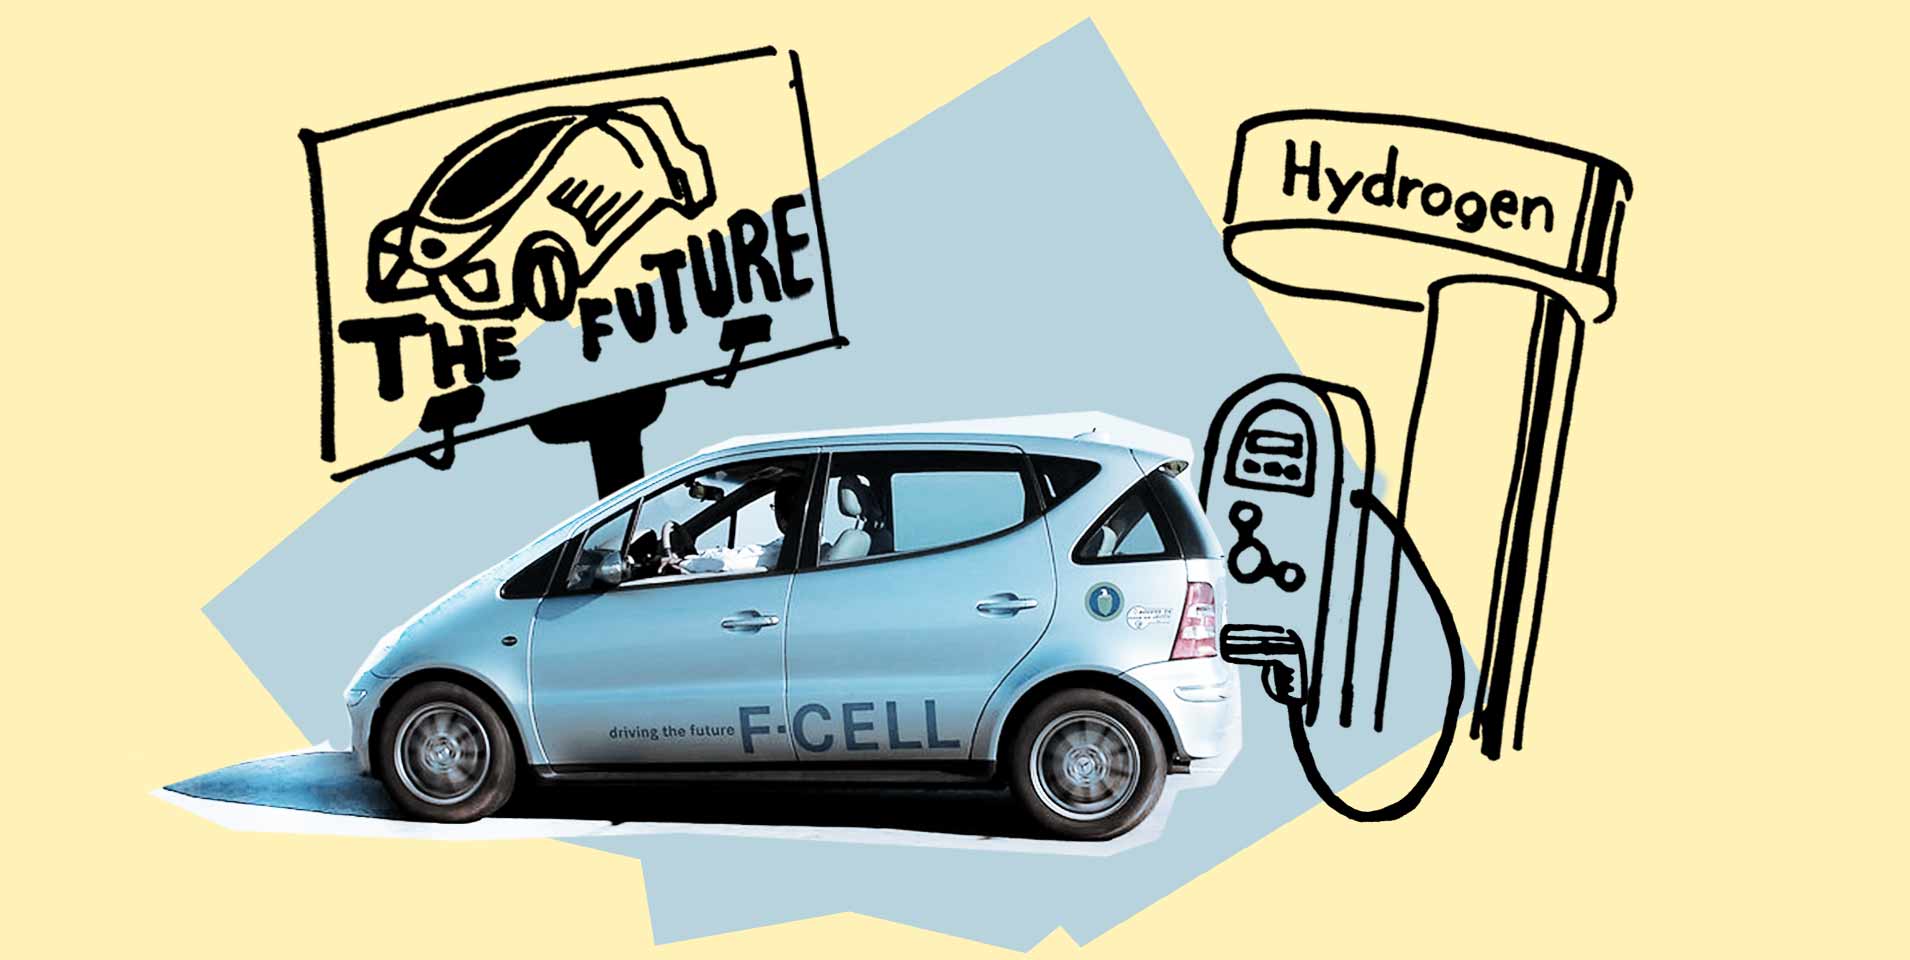 Why everyone is talking about hydrogen energy (and how it could power our future).